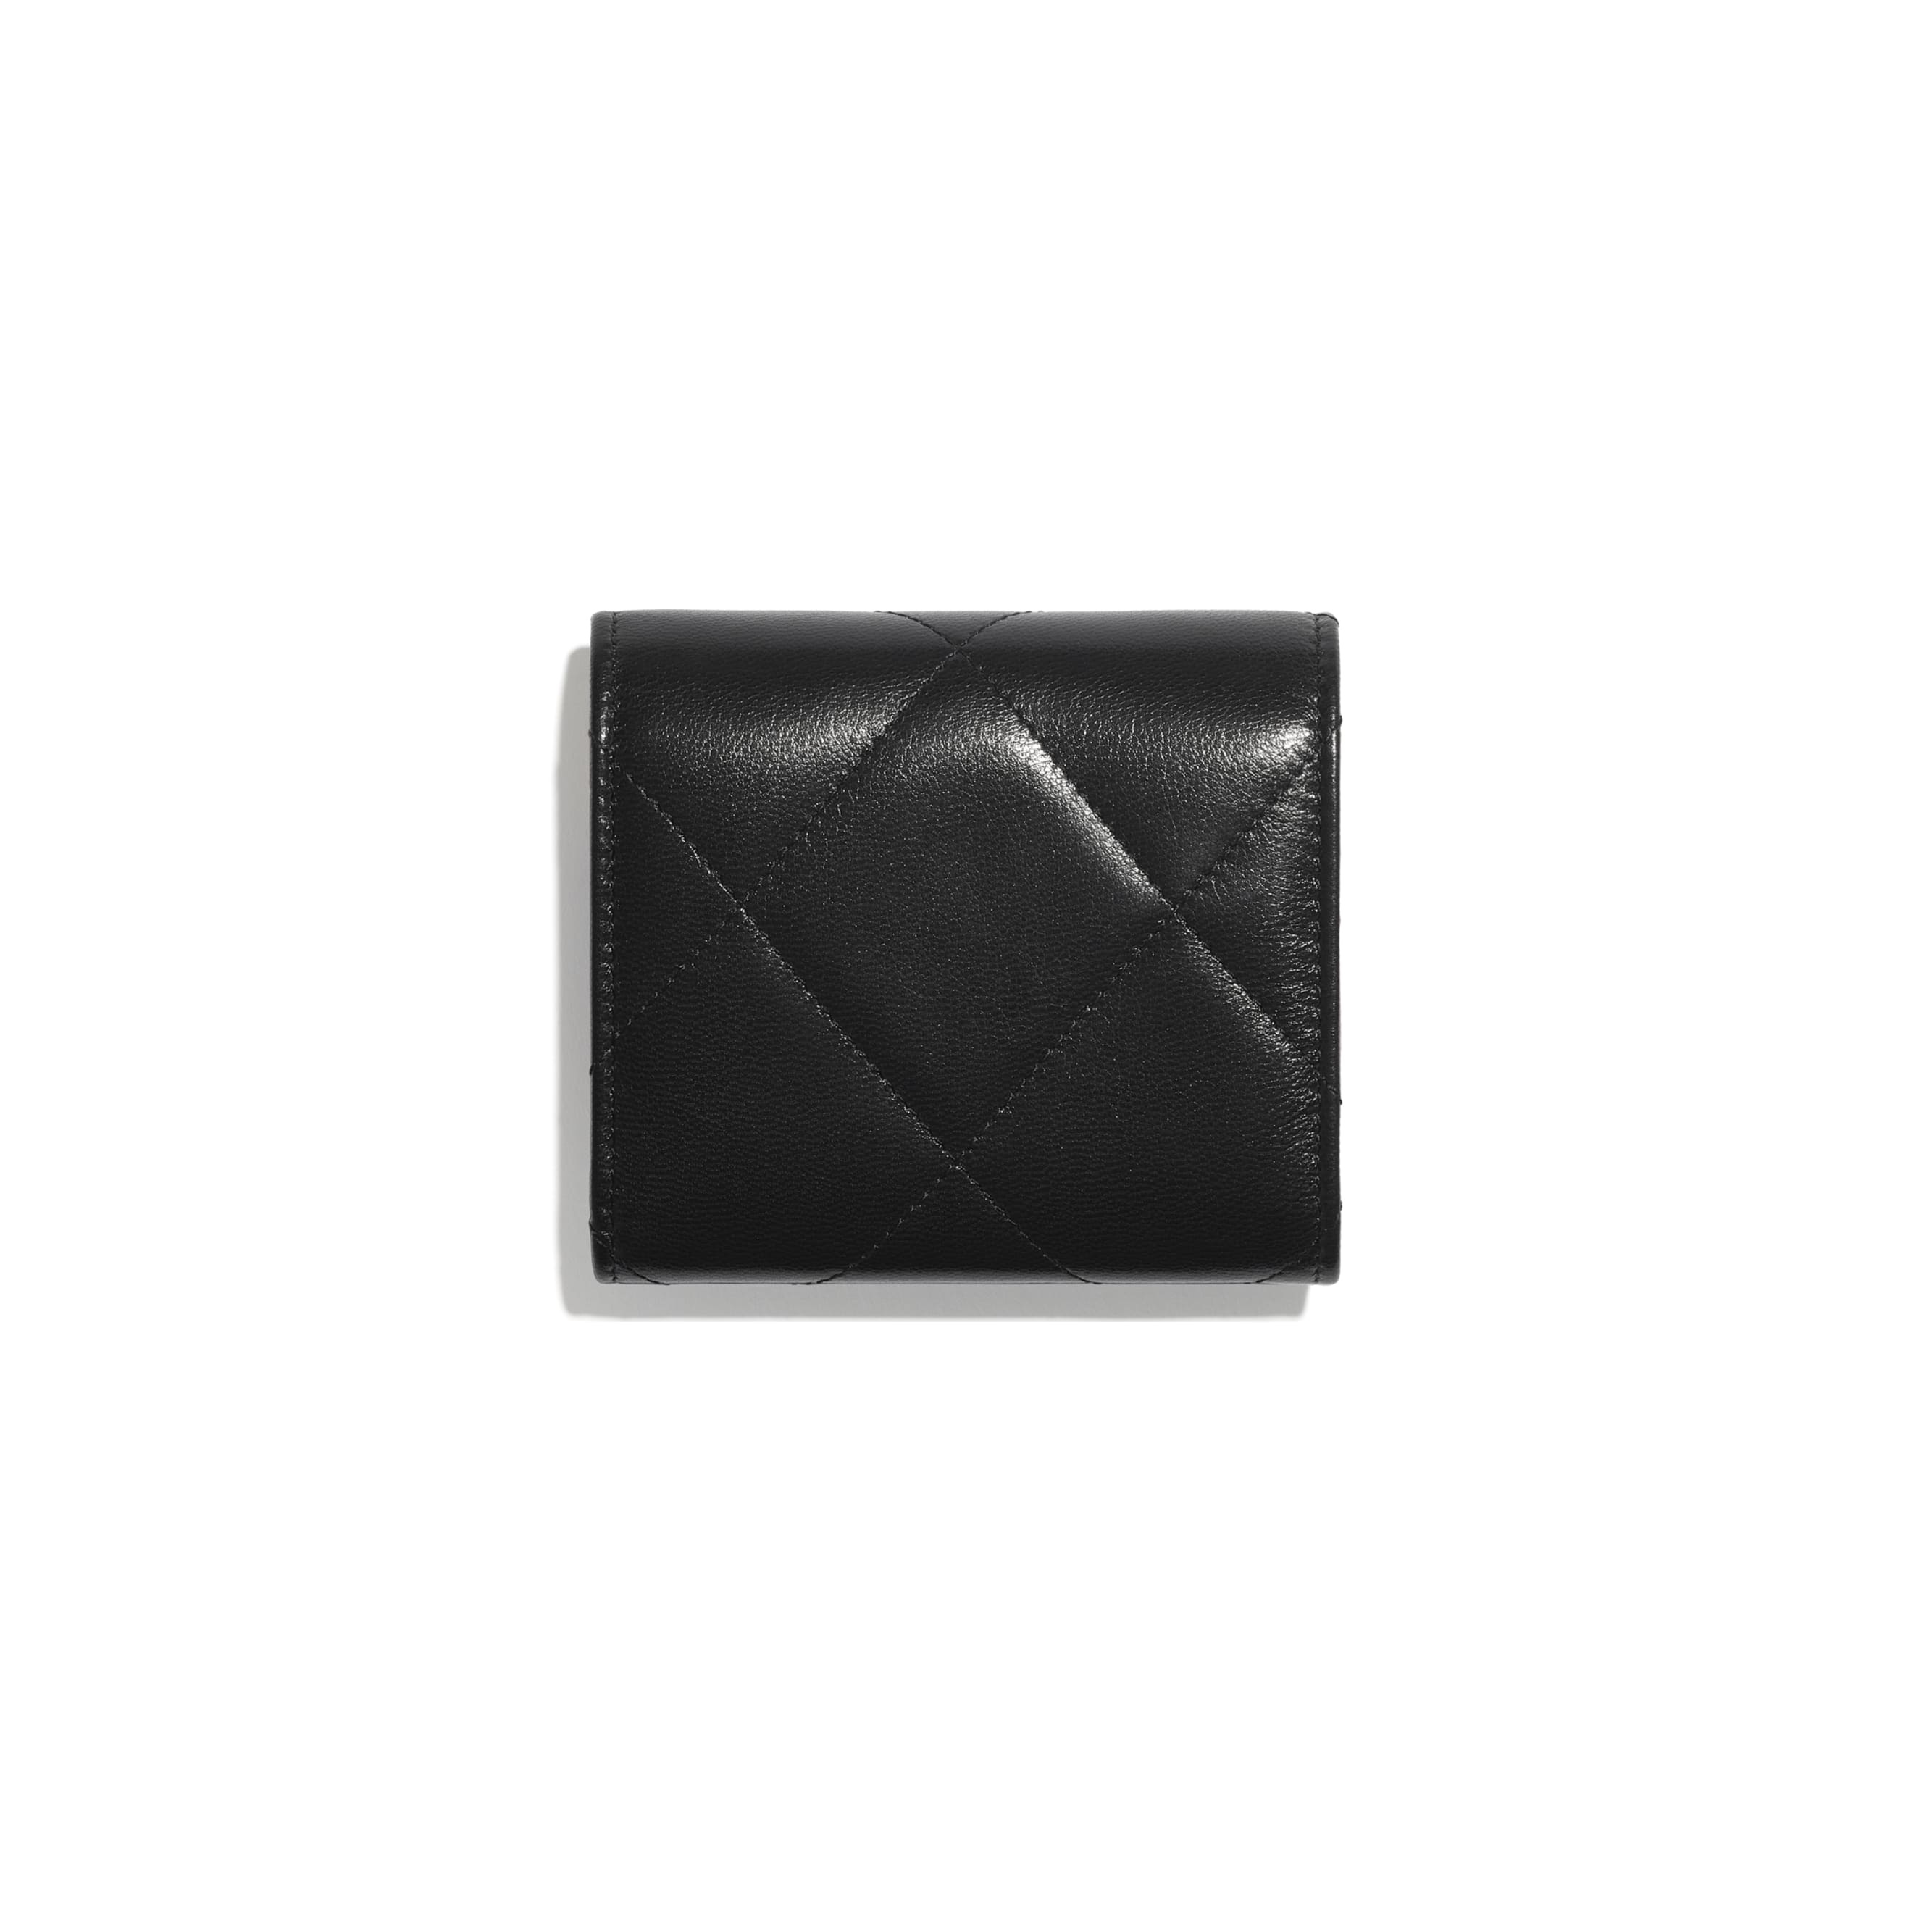 CHANEL 19 Small Flap Wallet - 2